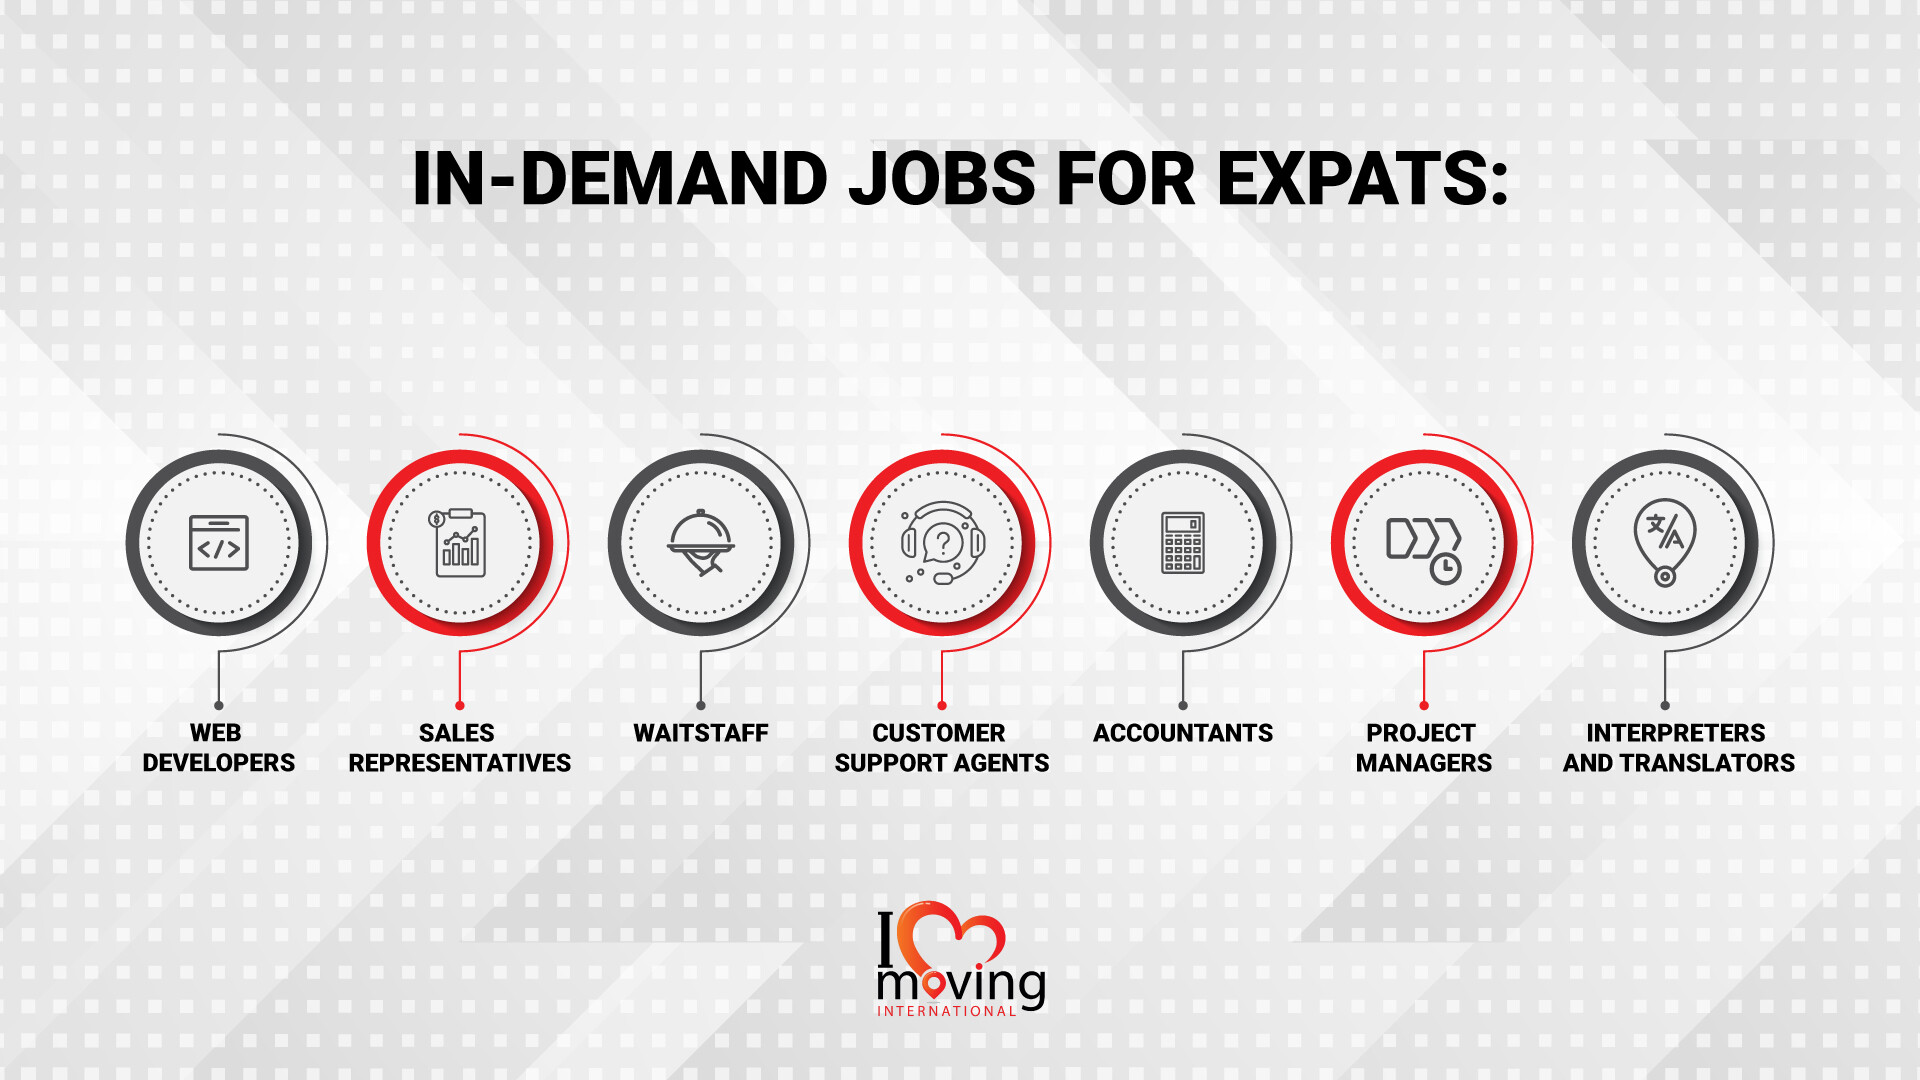 Infographic featuring the most in-demand jobs for expats in Lisbon, Portugal